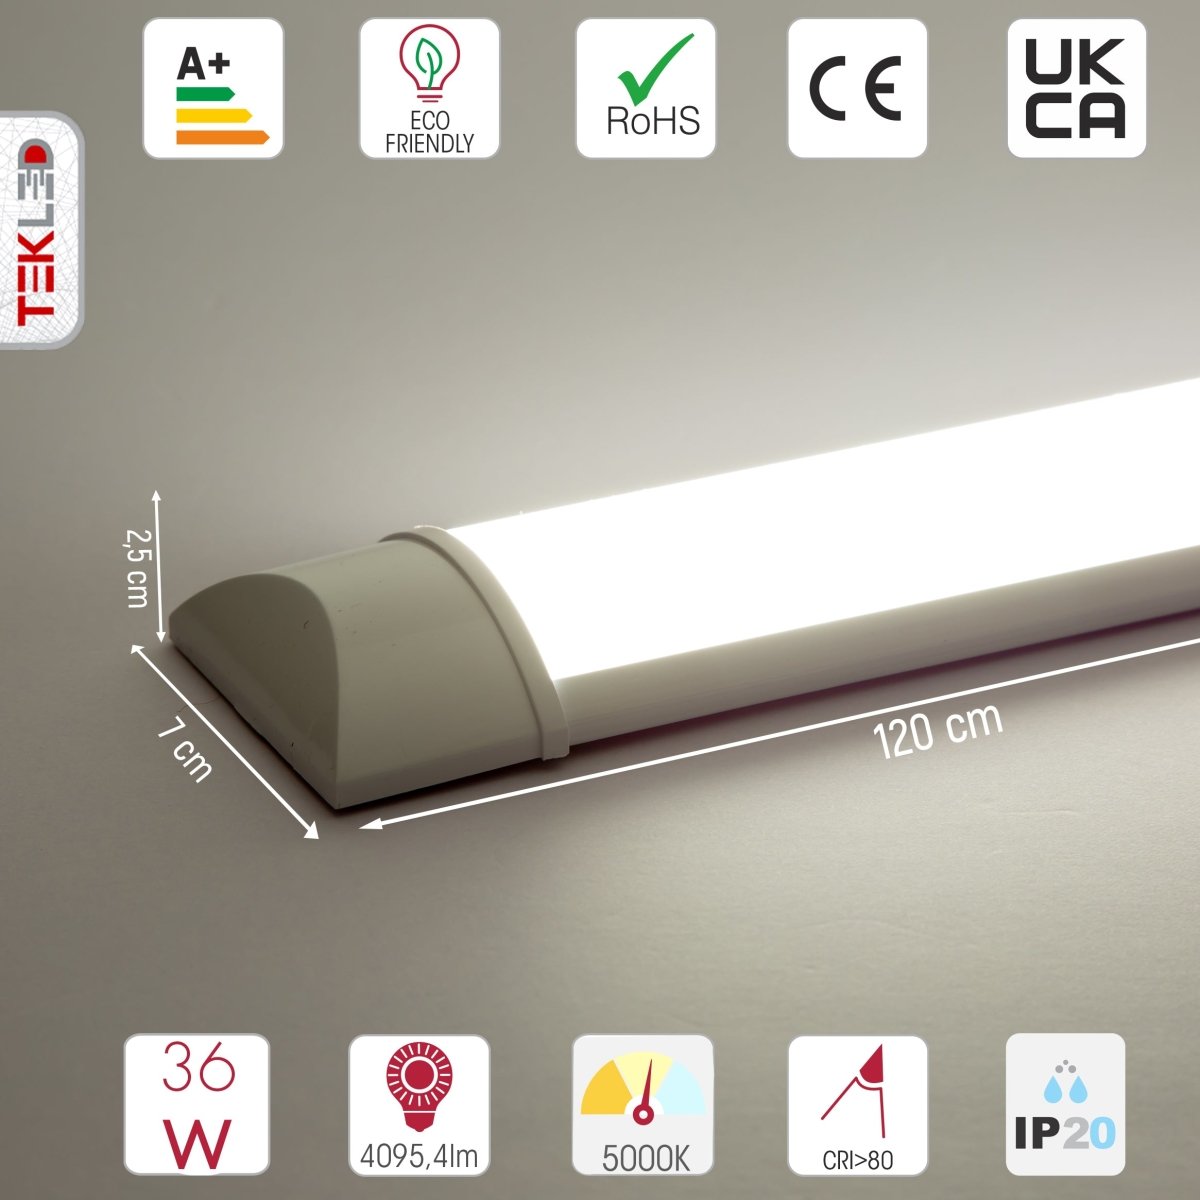 Technical specs and measurements for LED Surface Mounted Linear Fitting 36W 5000K Cool White IP20 120cm 4ft